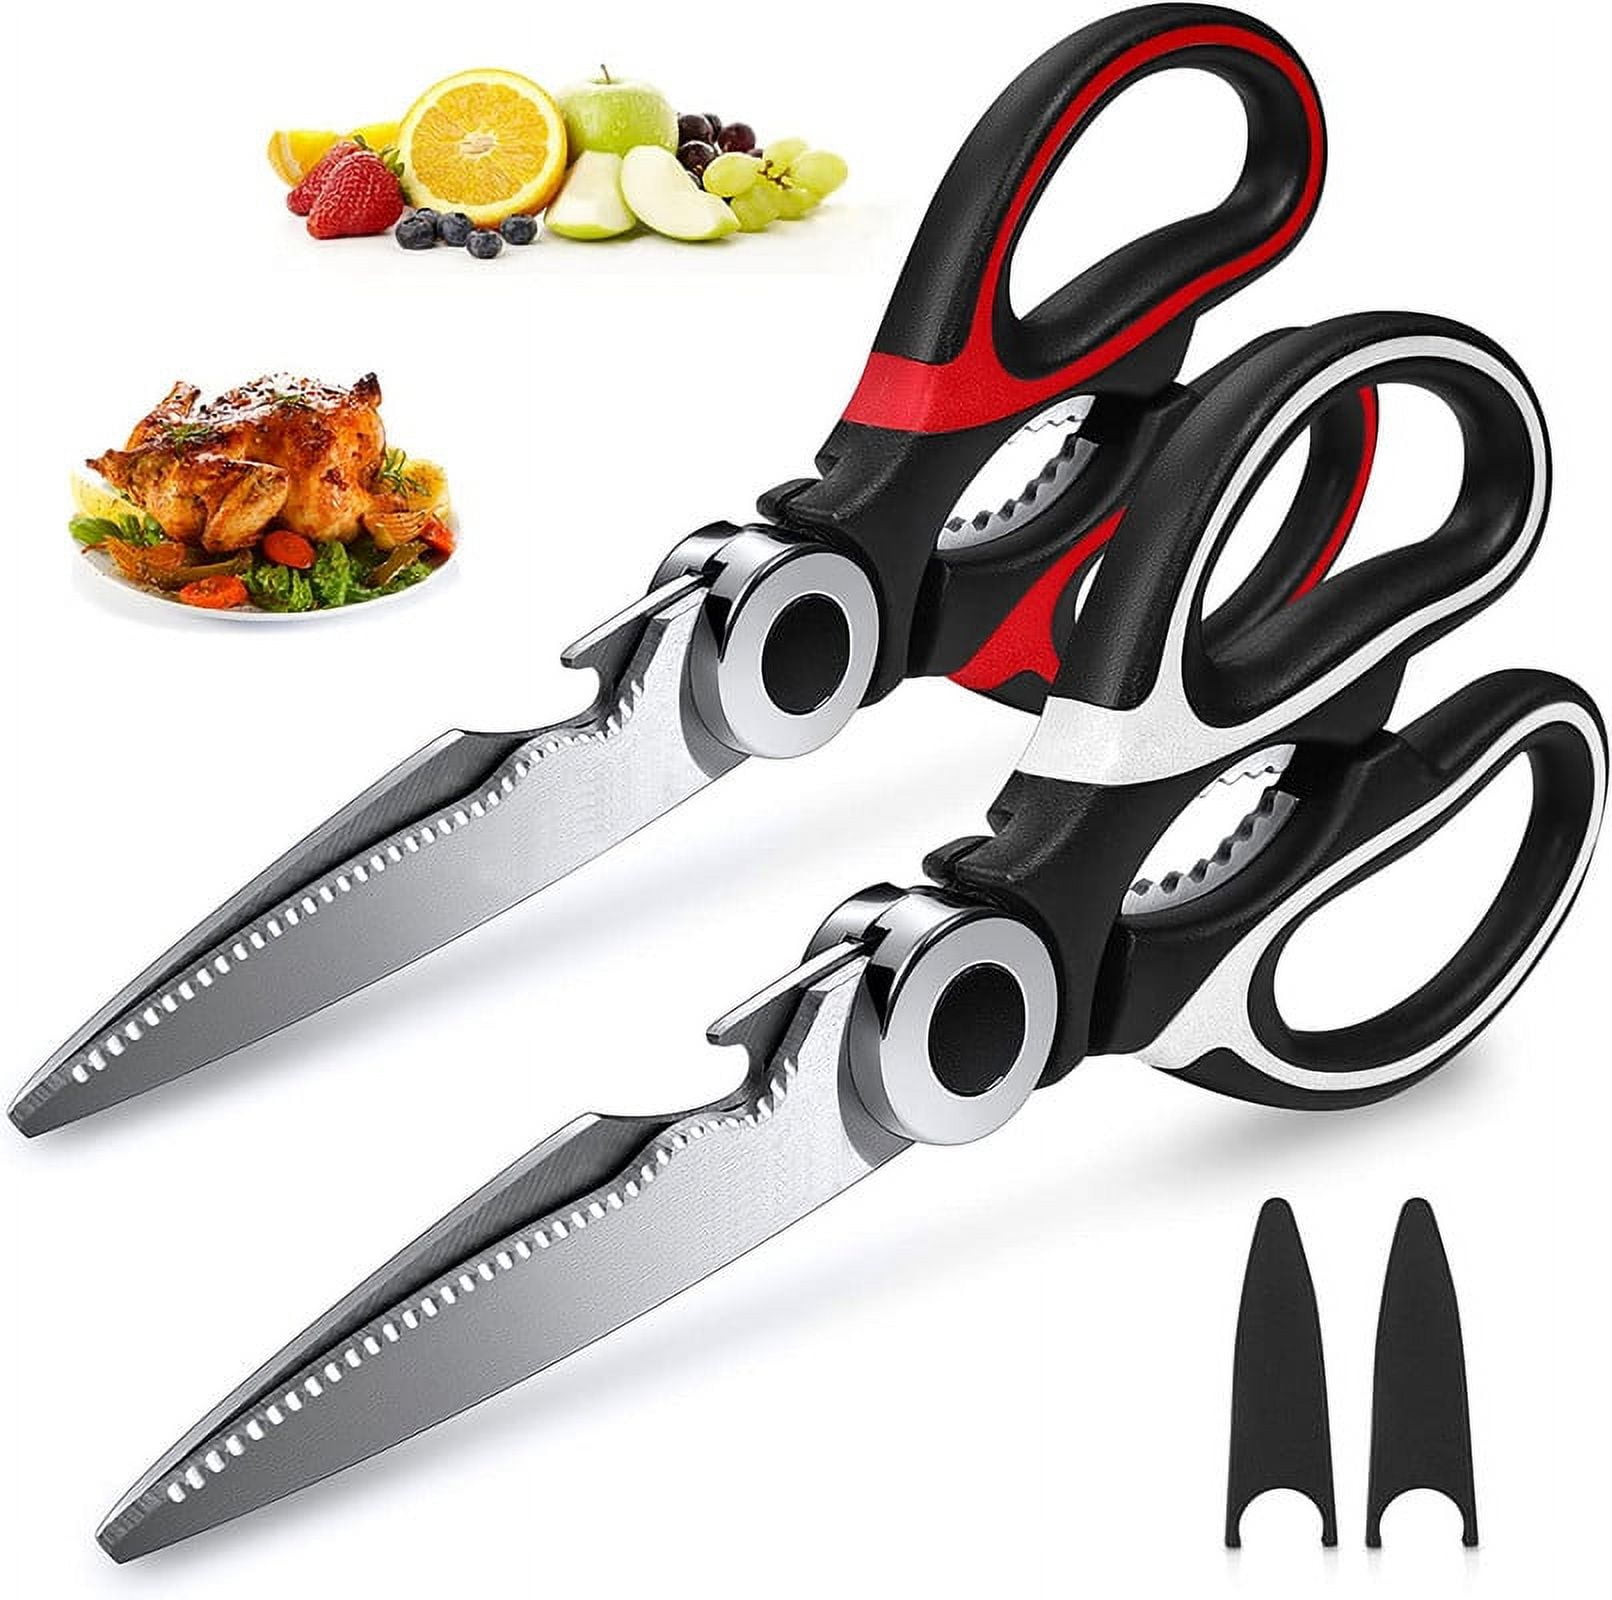 Country Kitchen Set of 2 Kitchen Scissors- Stainless Steel Kitchen Shears,  Cooking Scissors for Cutting Meat, Chicken, Herbs and Produce with Blade